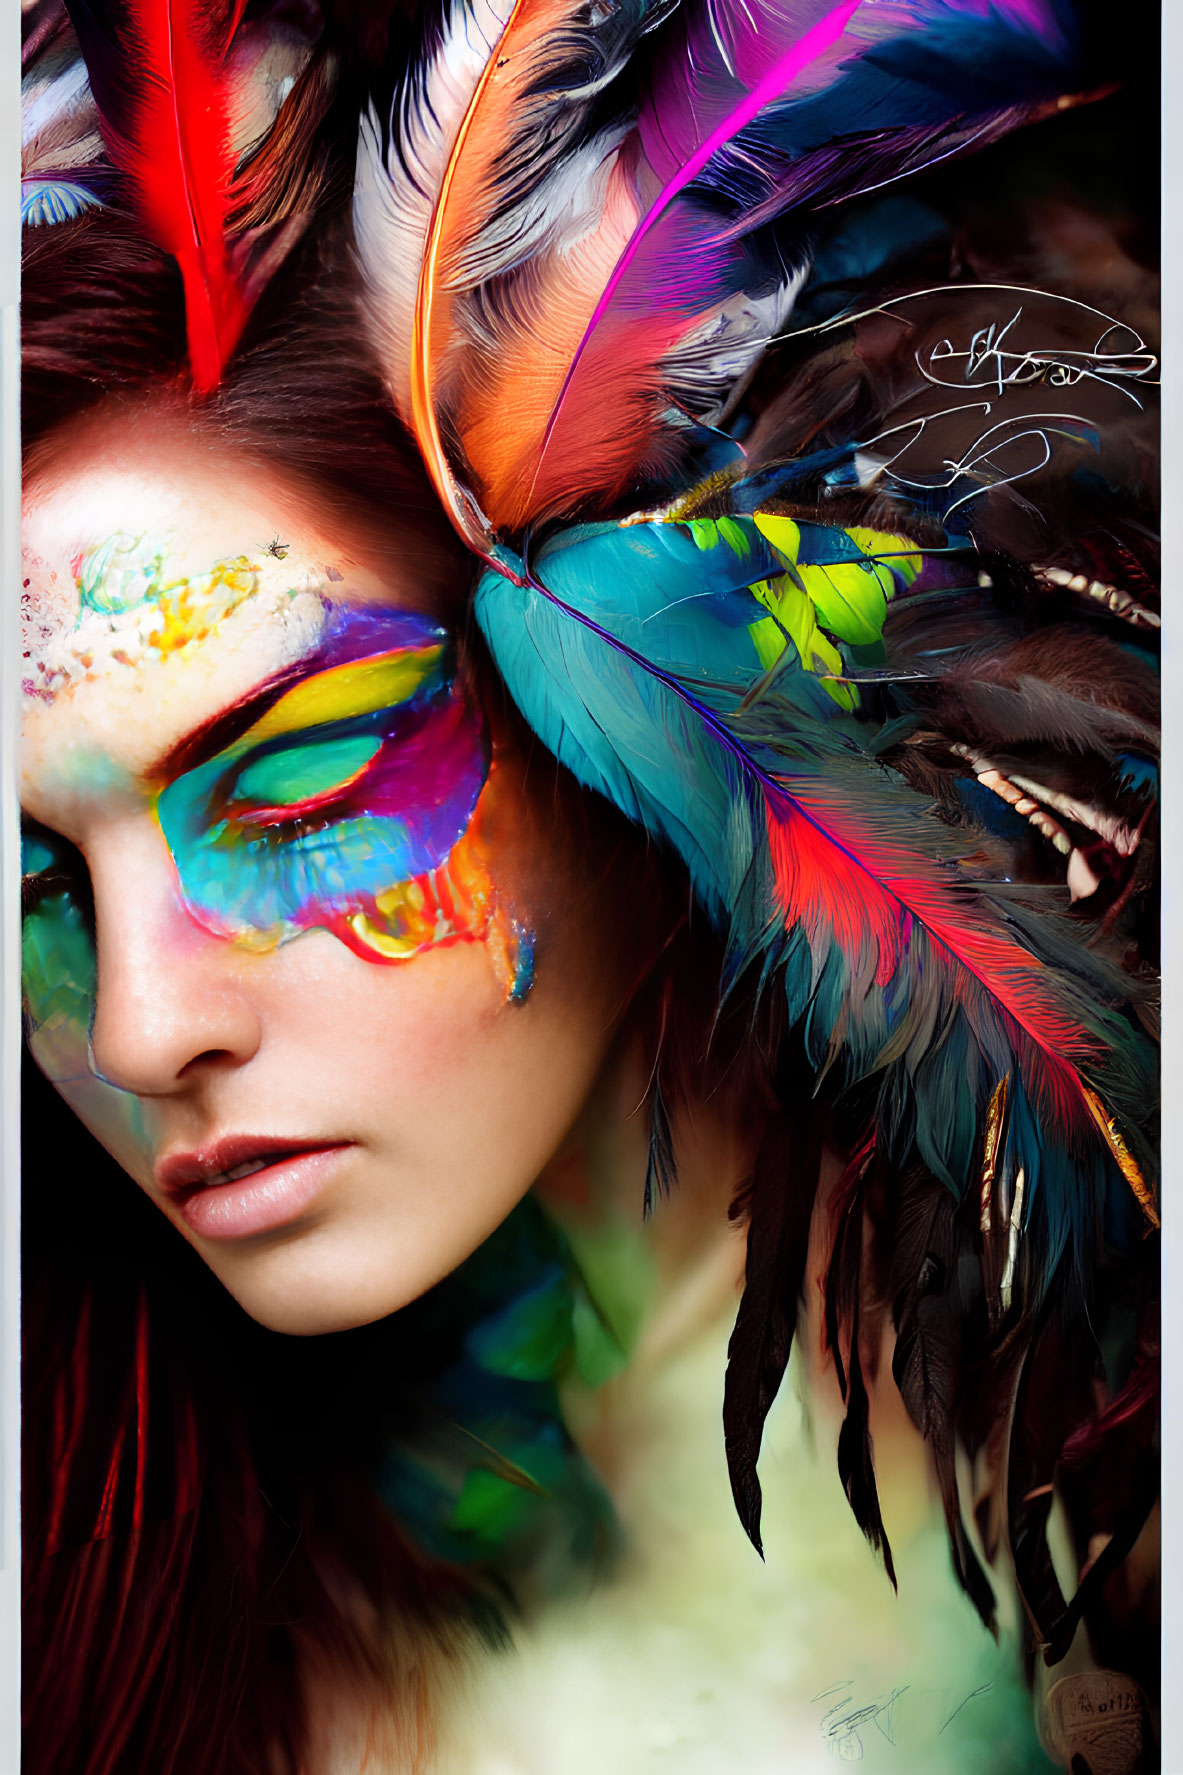 Vibrant face paint and colorful feather headdress on person